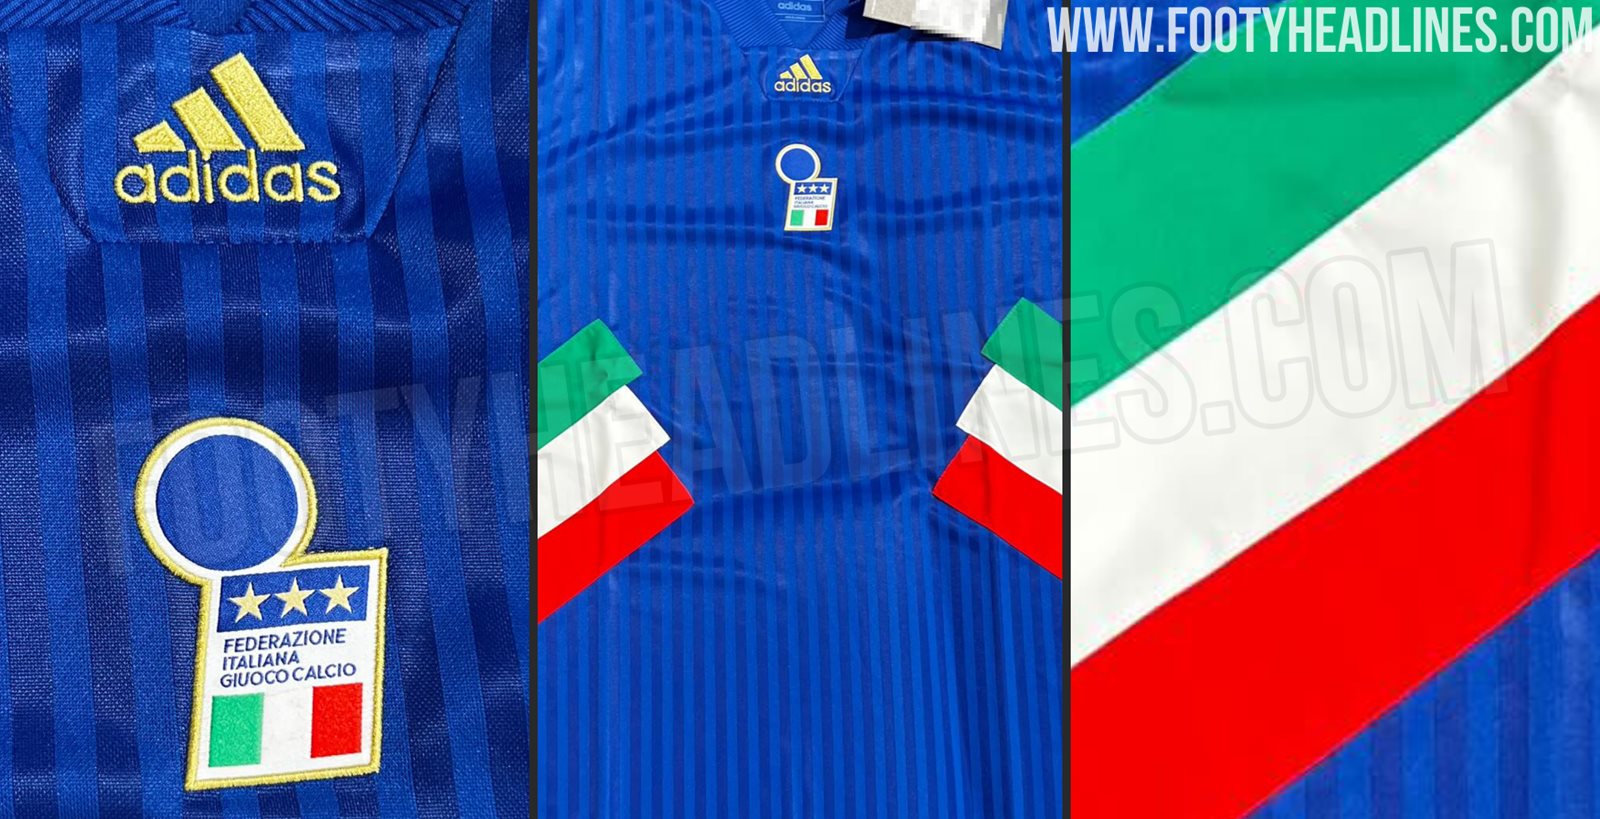 Adidas 2023 Italy Authentic Home Jersey - Blue, S